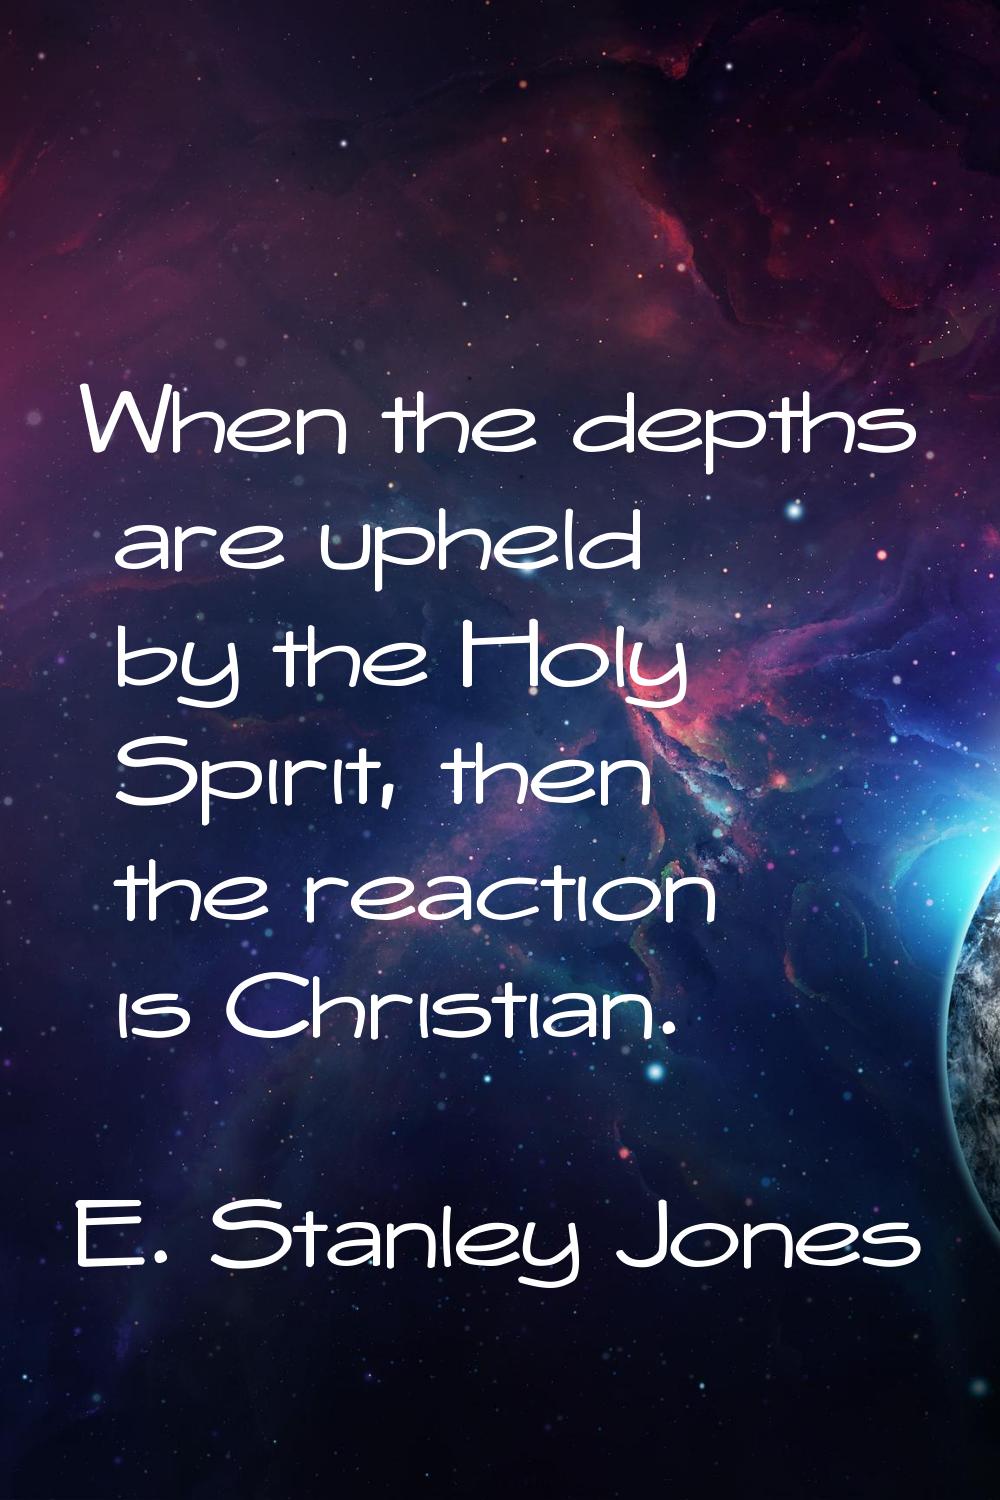 When the depths are upheld by the Holy Spirit, then the reaction is Christian.